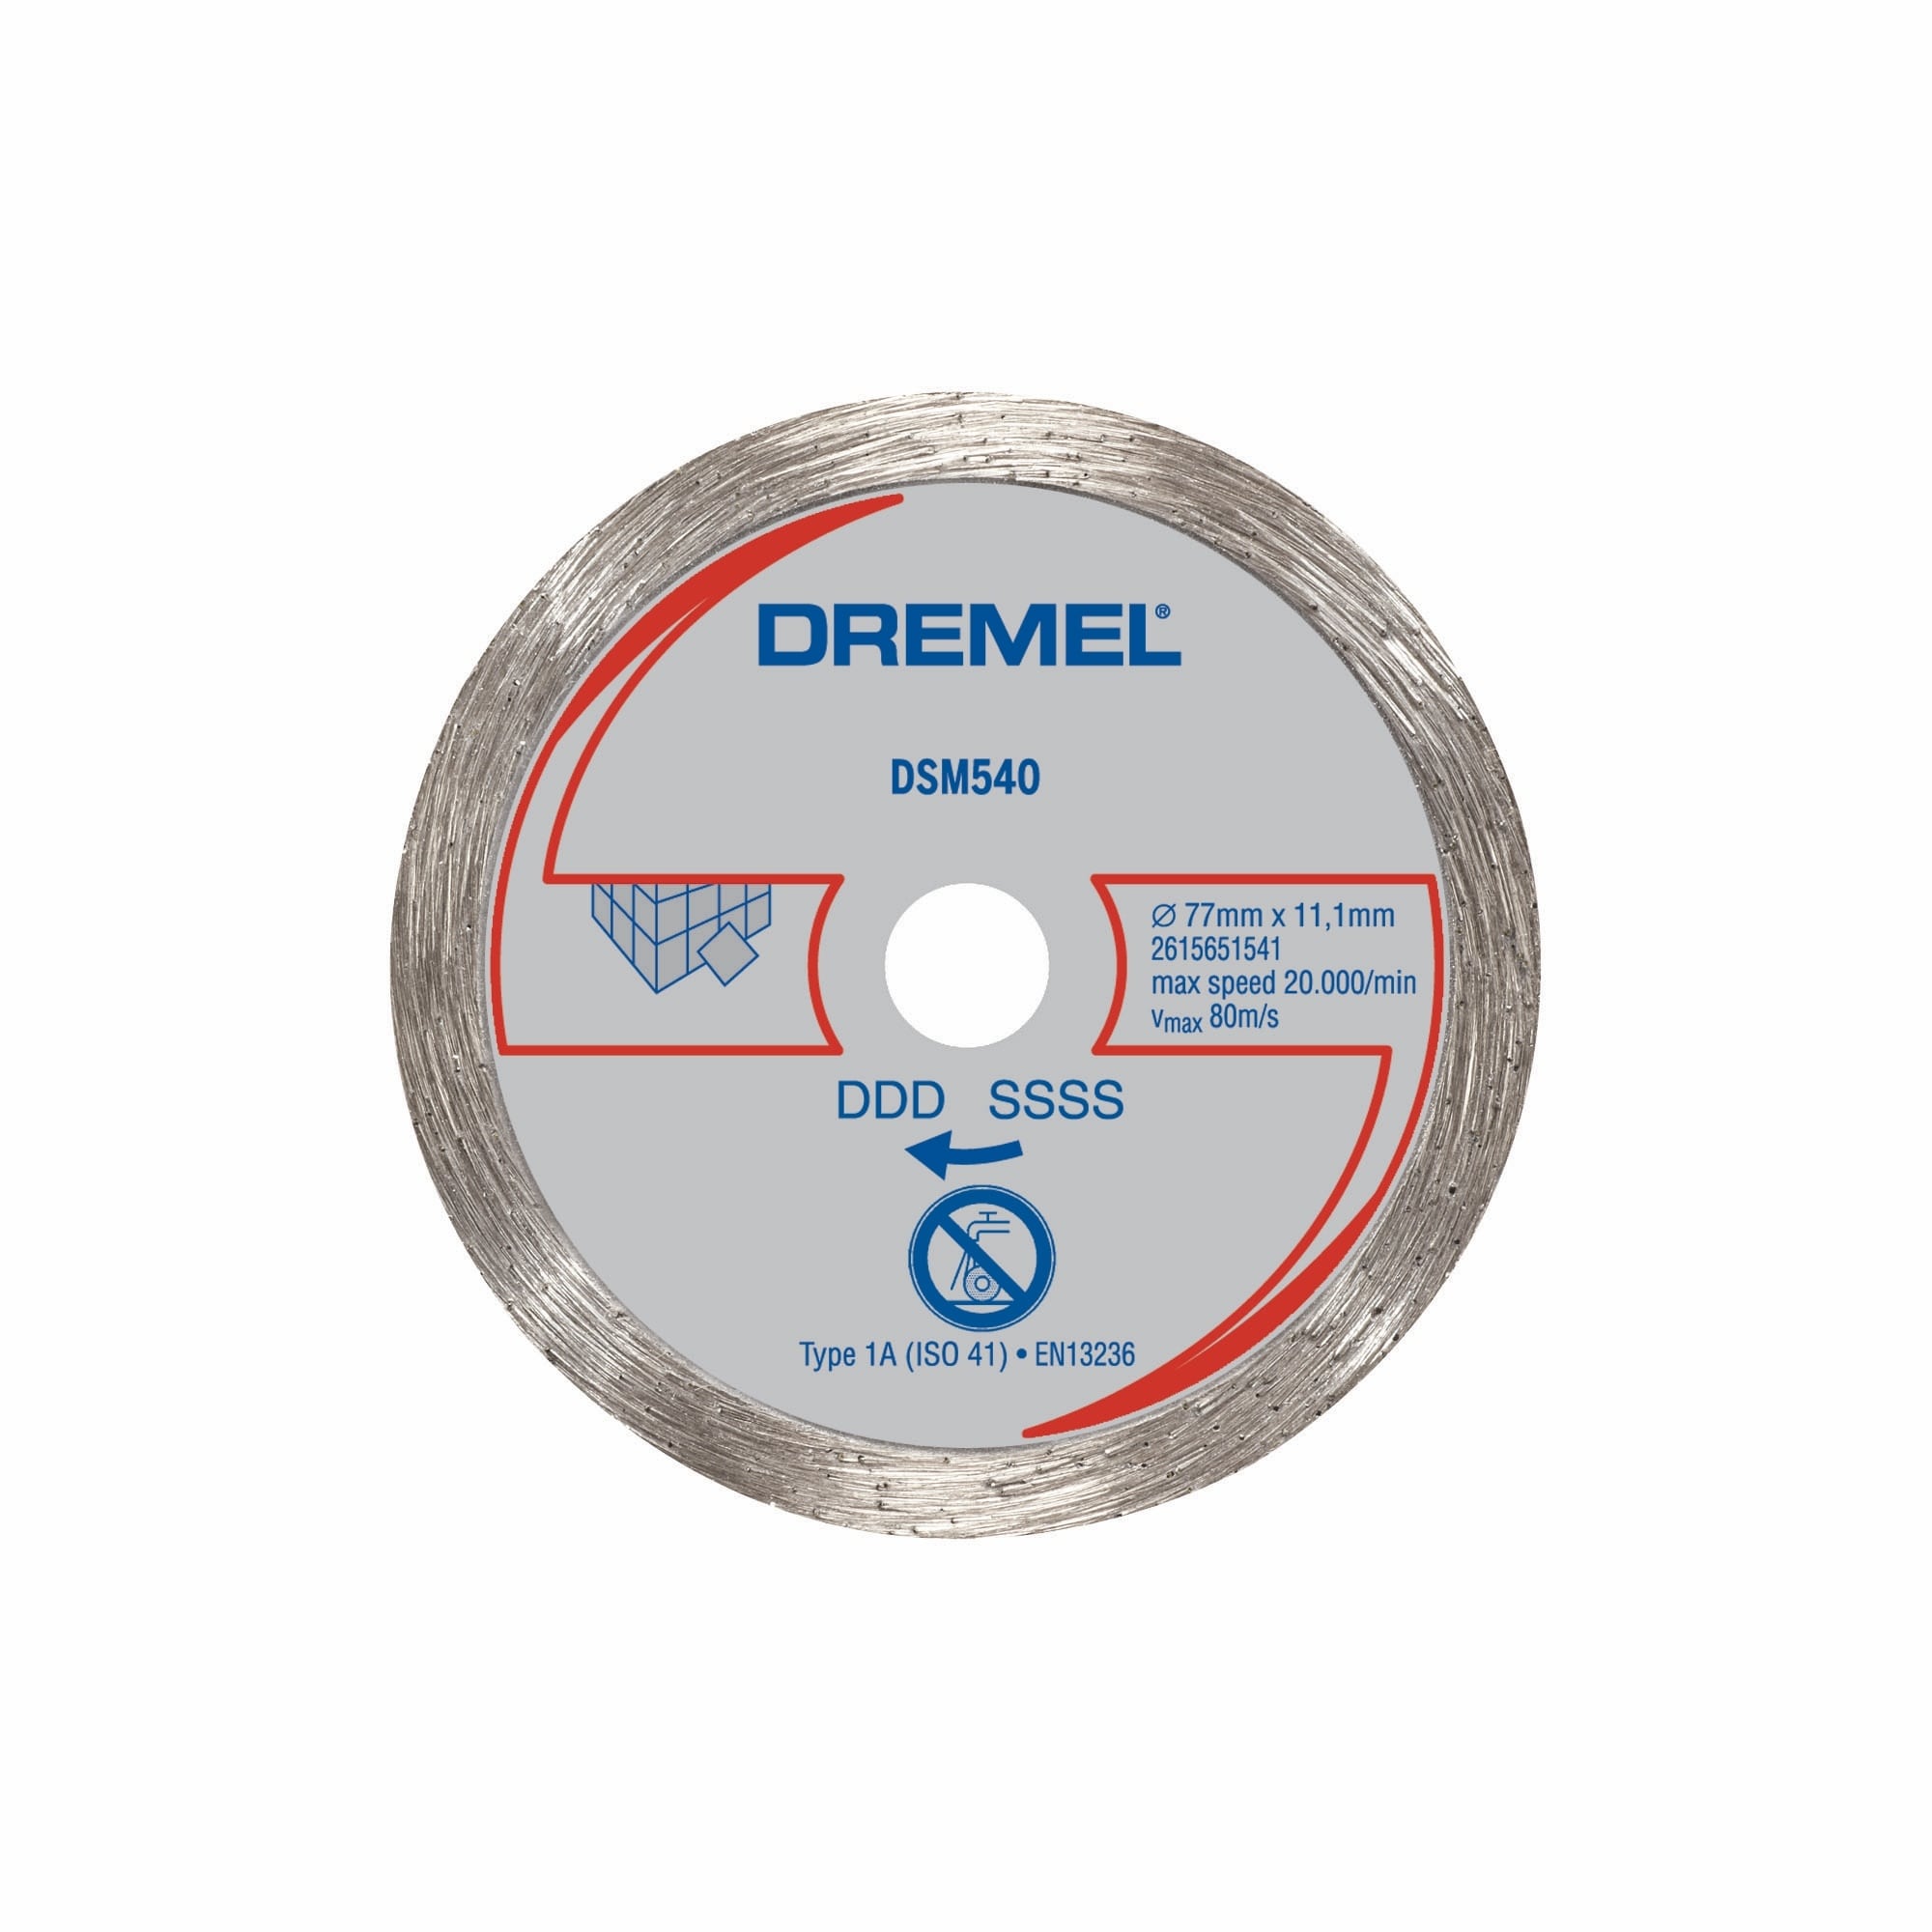 Dremel Saw-Max SM540 3-1/8-in Blade at Lowes.com